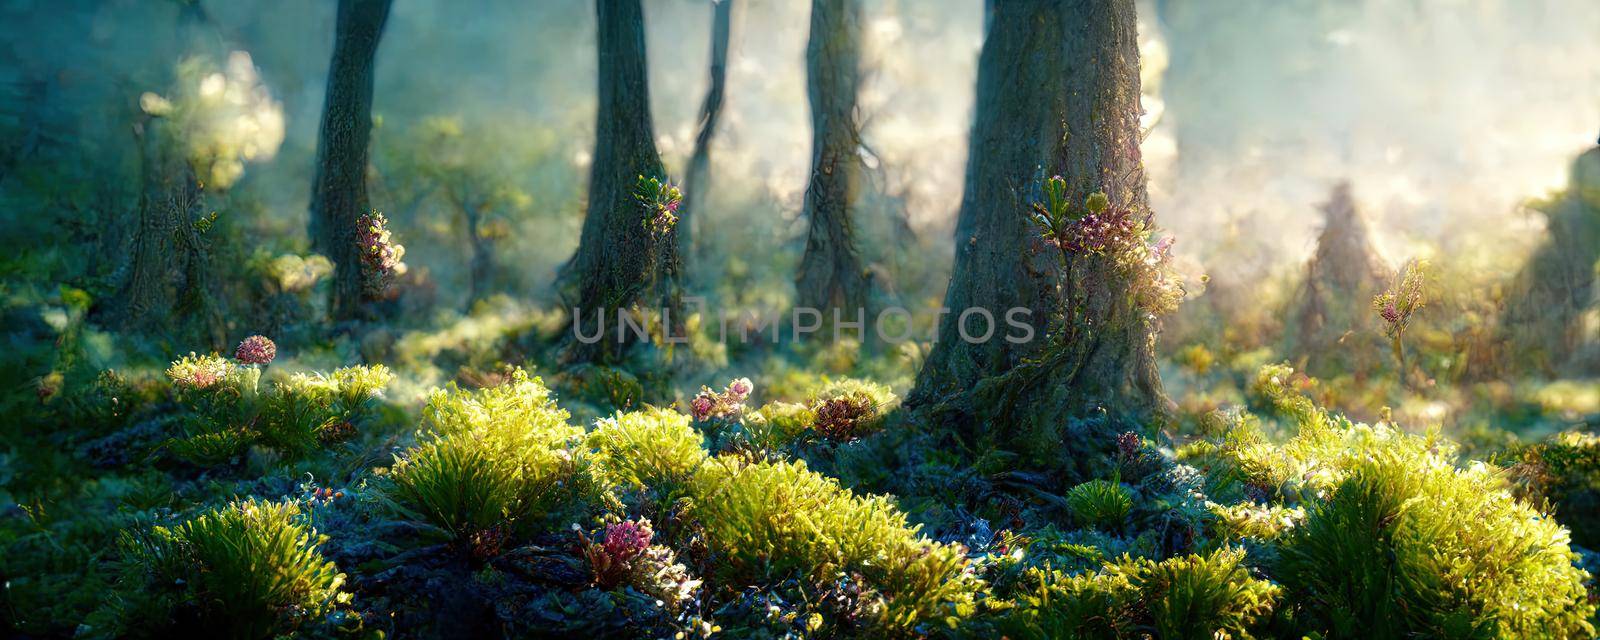 fantasy forest landscape with moss and trees by TRMK